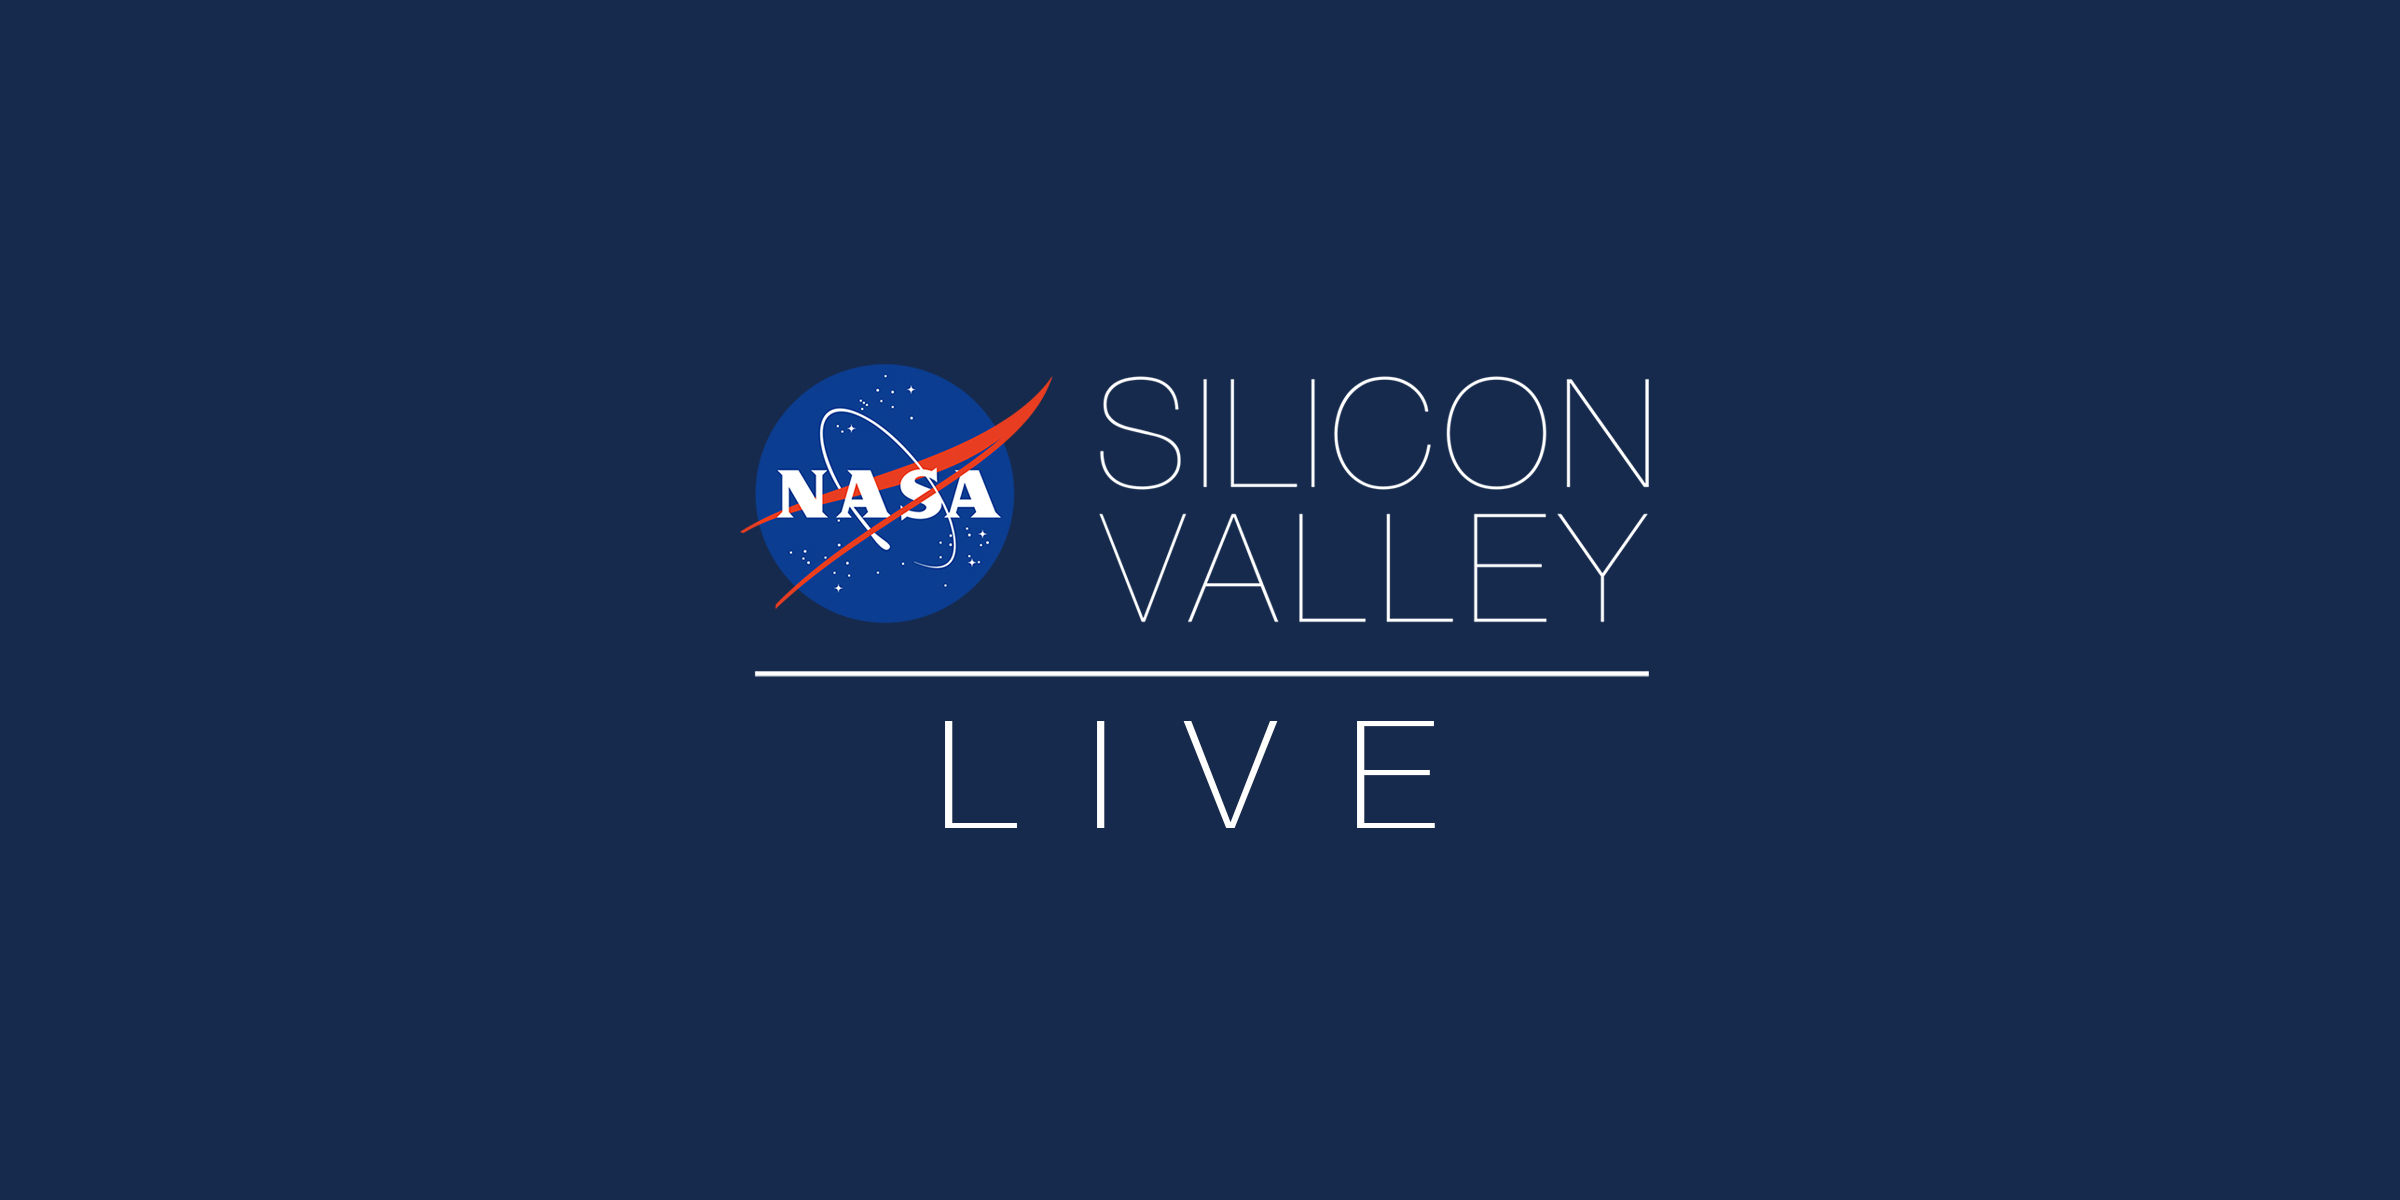 NASA in Silicon Valley Live - Moon 2024: Countdown to Arrival